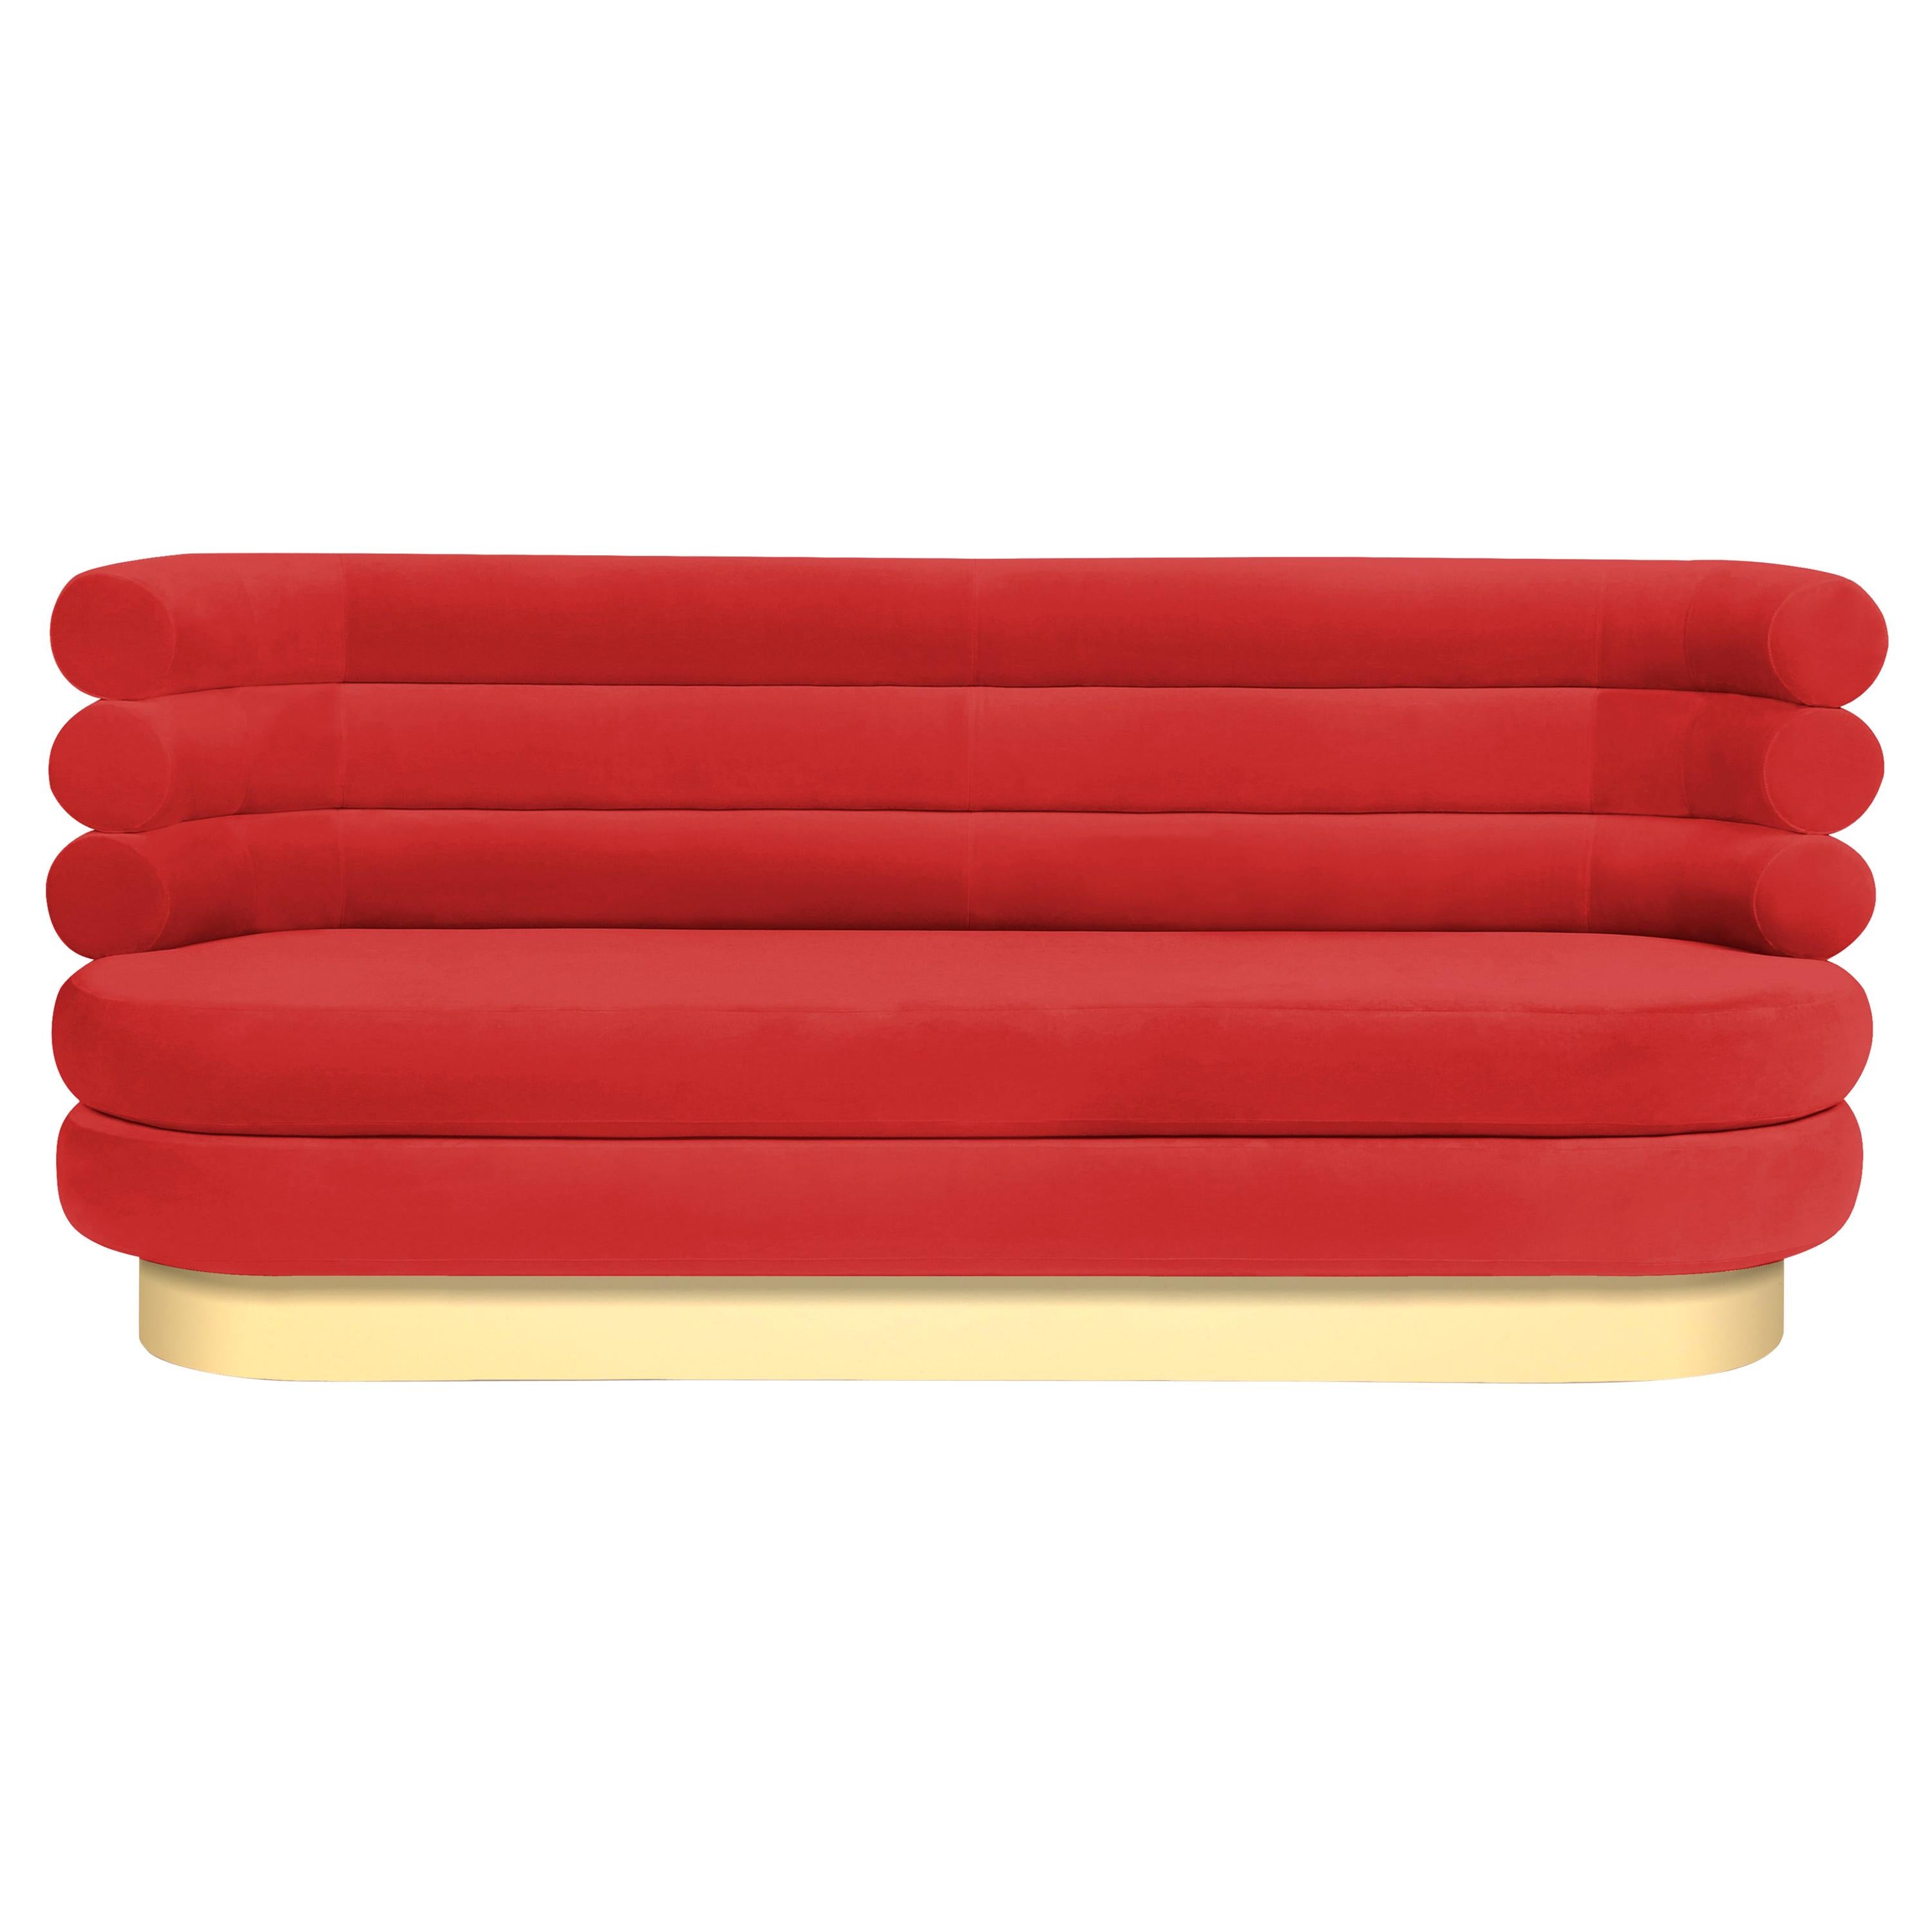 Colorful Red Marshmallow Sofa "Royal Stranger" For Sale